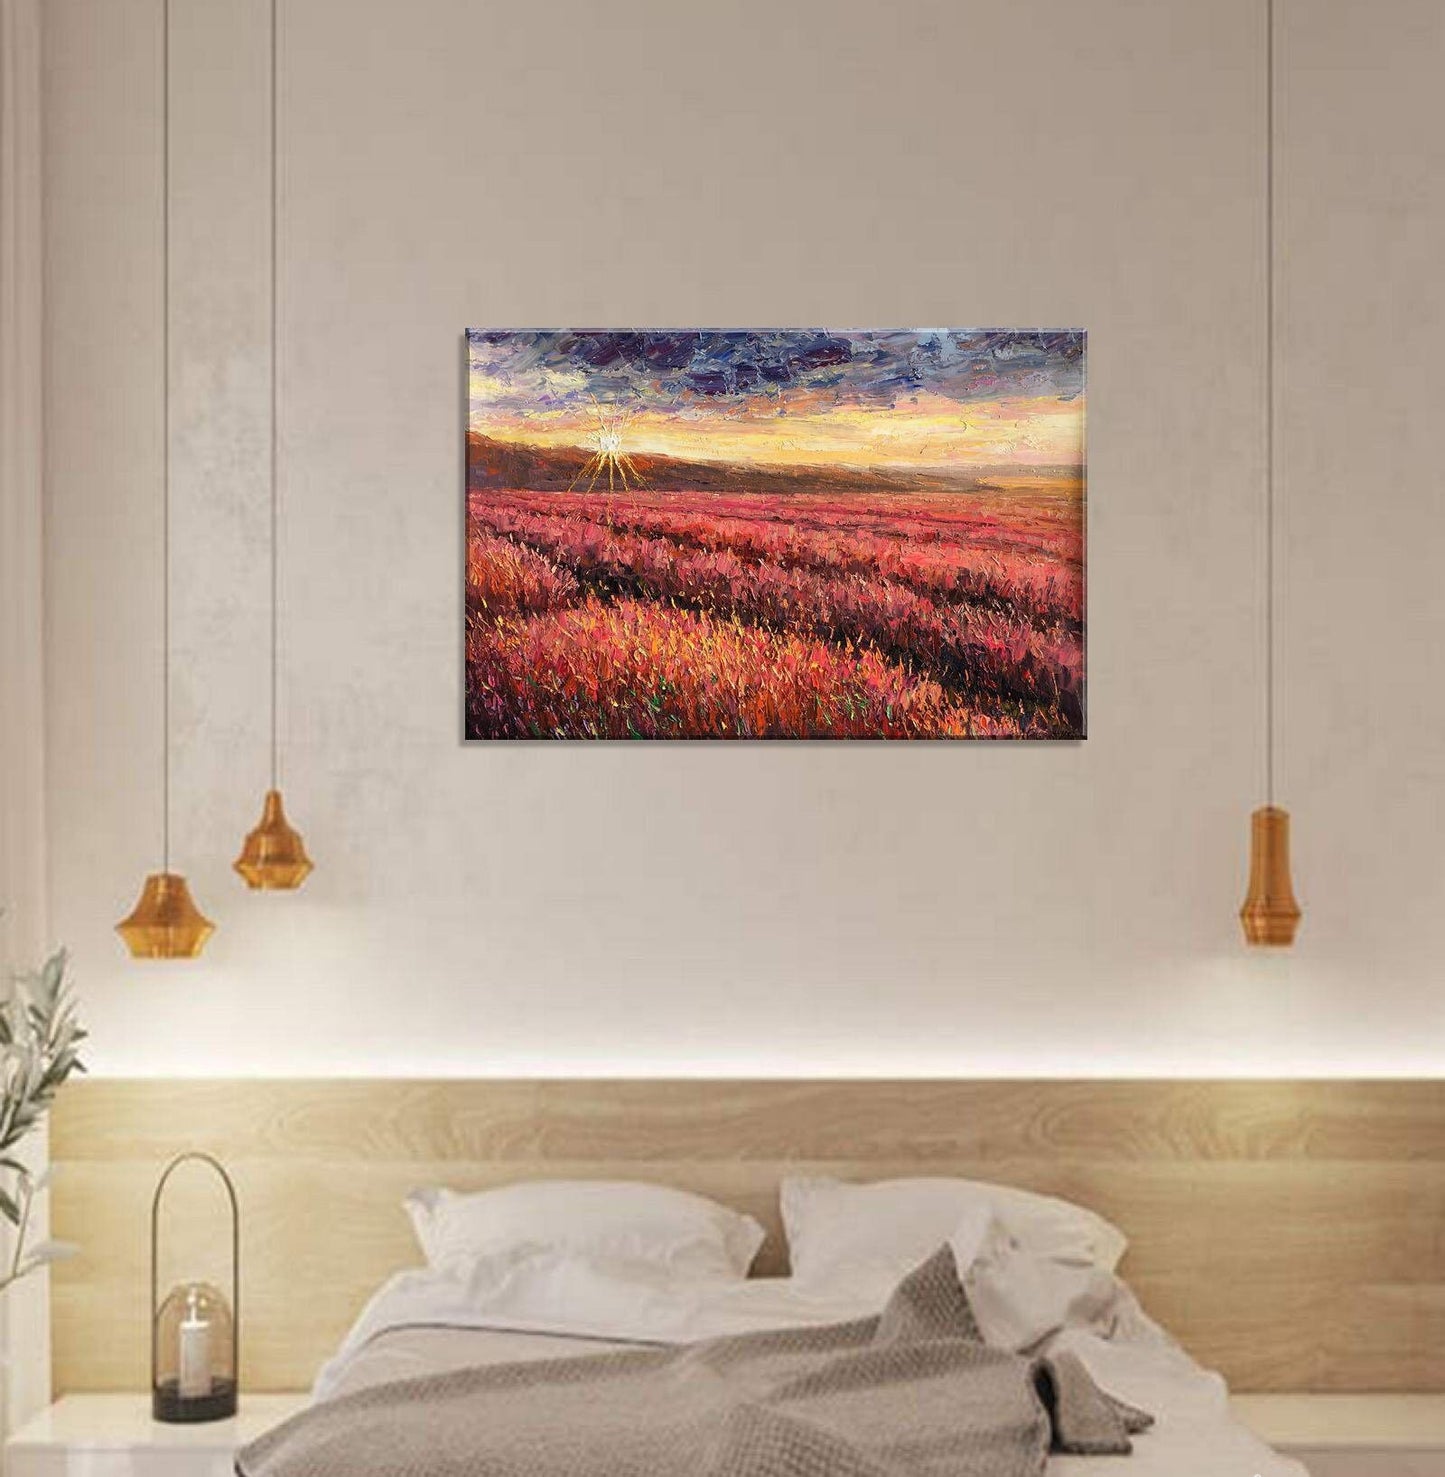 Beautiful Oil Painting Tuscany Landscape Sunset, 32x48 inches ready to hang, Canvas Wall Art, Oil On Canvas Painting, Oversized Wall Art